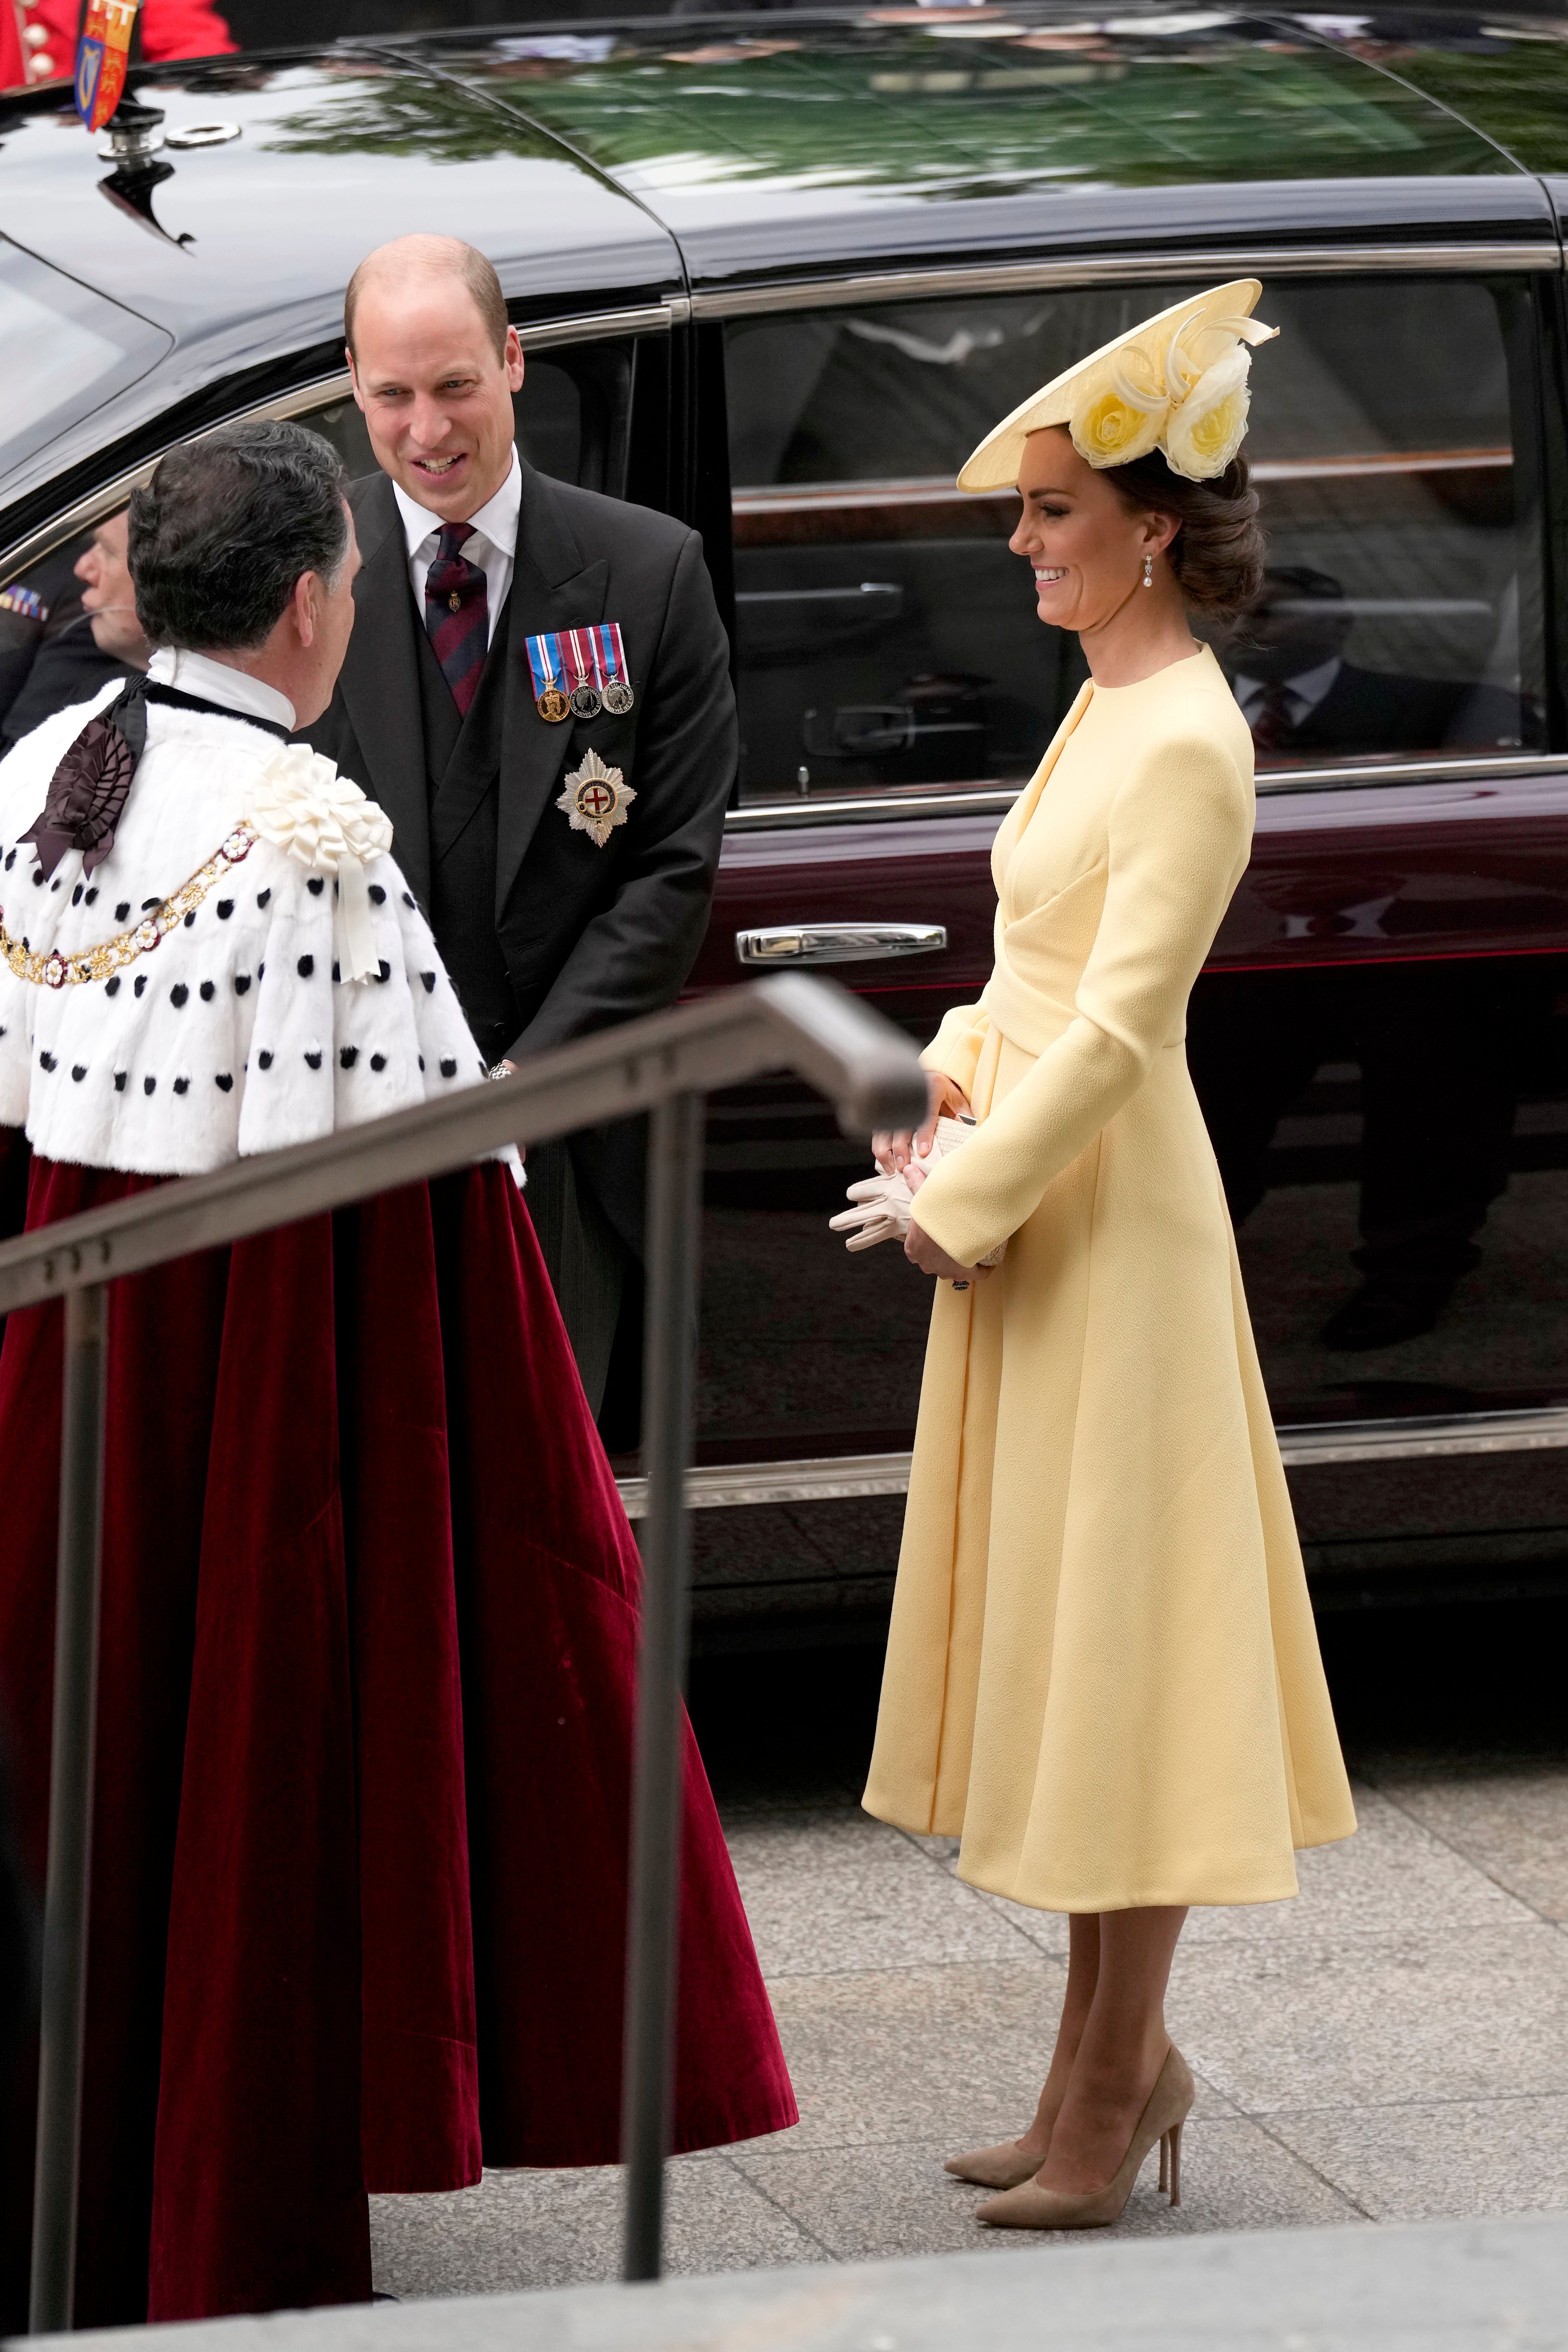 The Duchess completed the look with suede pointed-toe heels